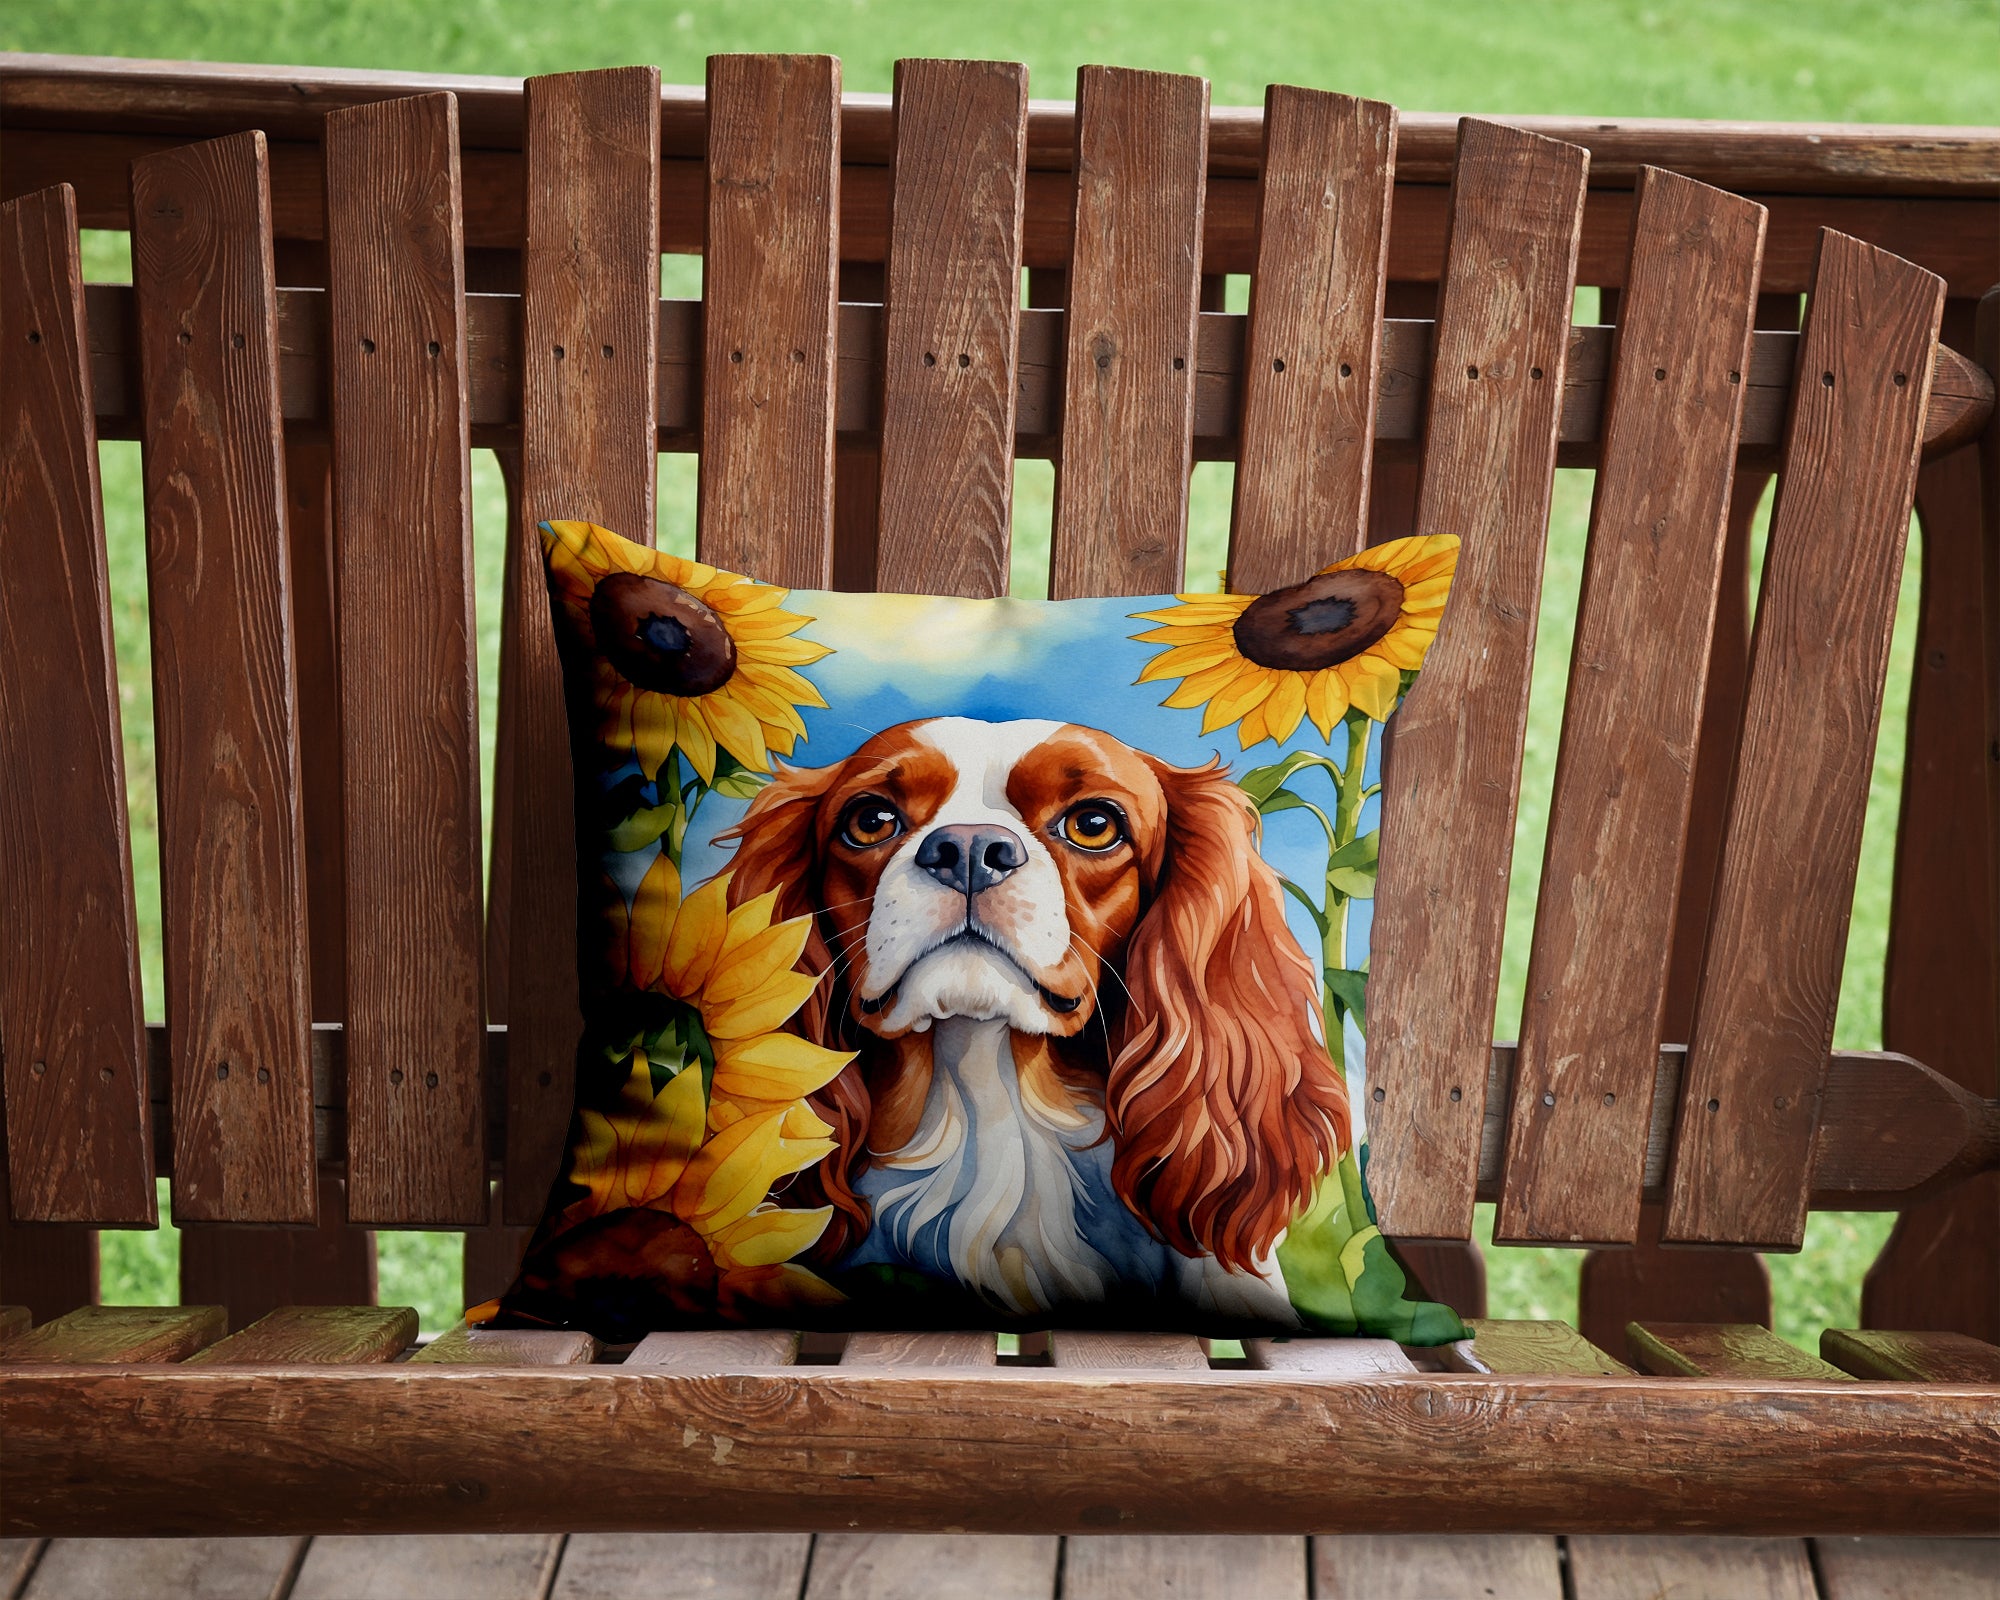 Buy this Cavalier Spaniel in Sunflowers Throw Pillow